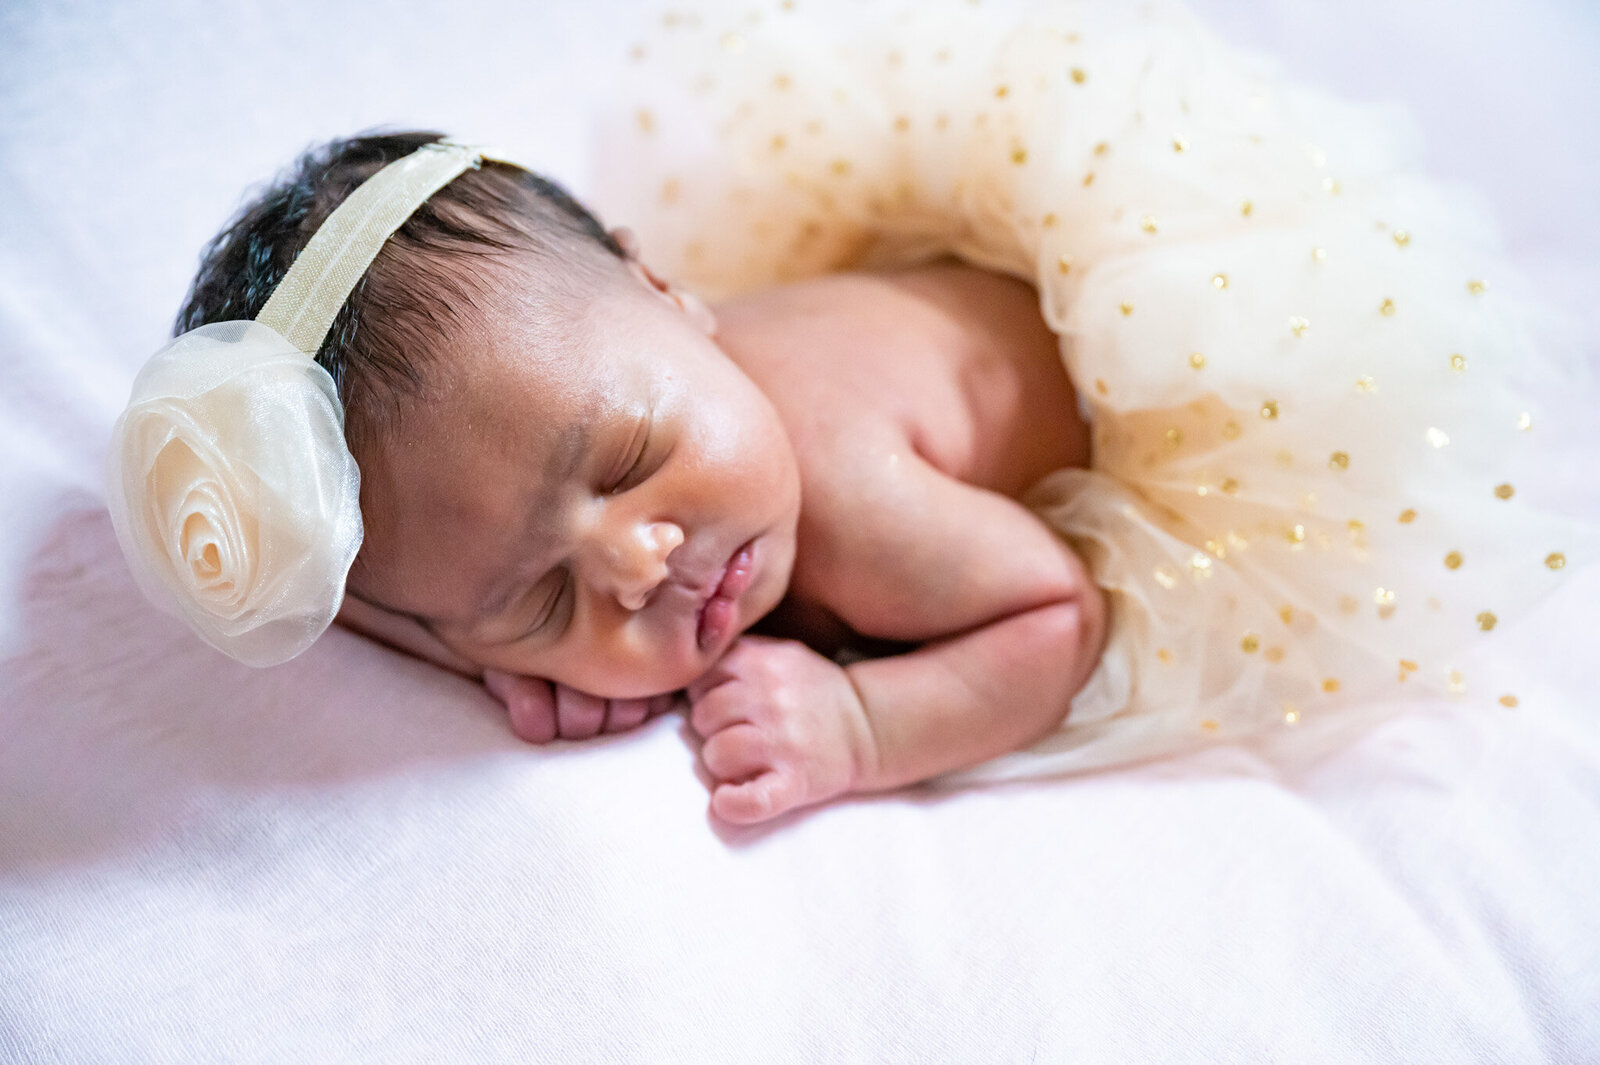 newborn baby girl with a white flower on her headband wearing a white tutu sleeping on a pink blanket photographed by Millz Photography in Greenville, SC